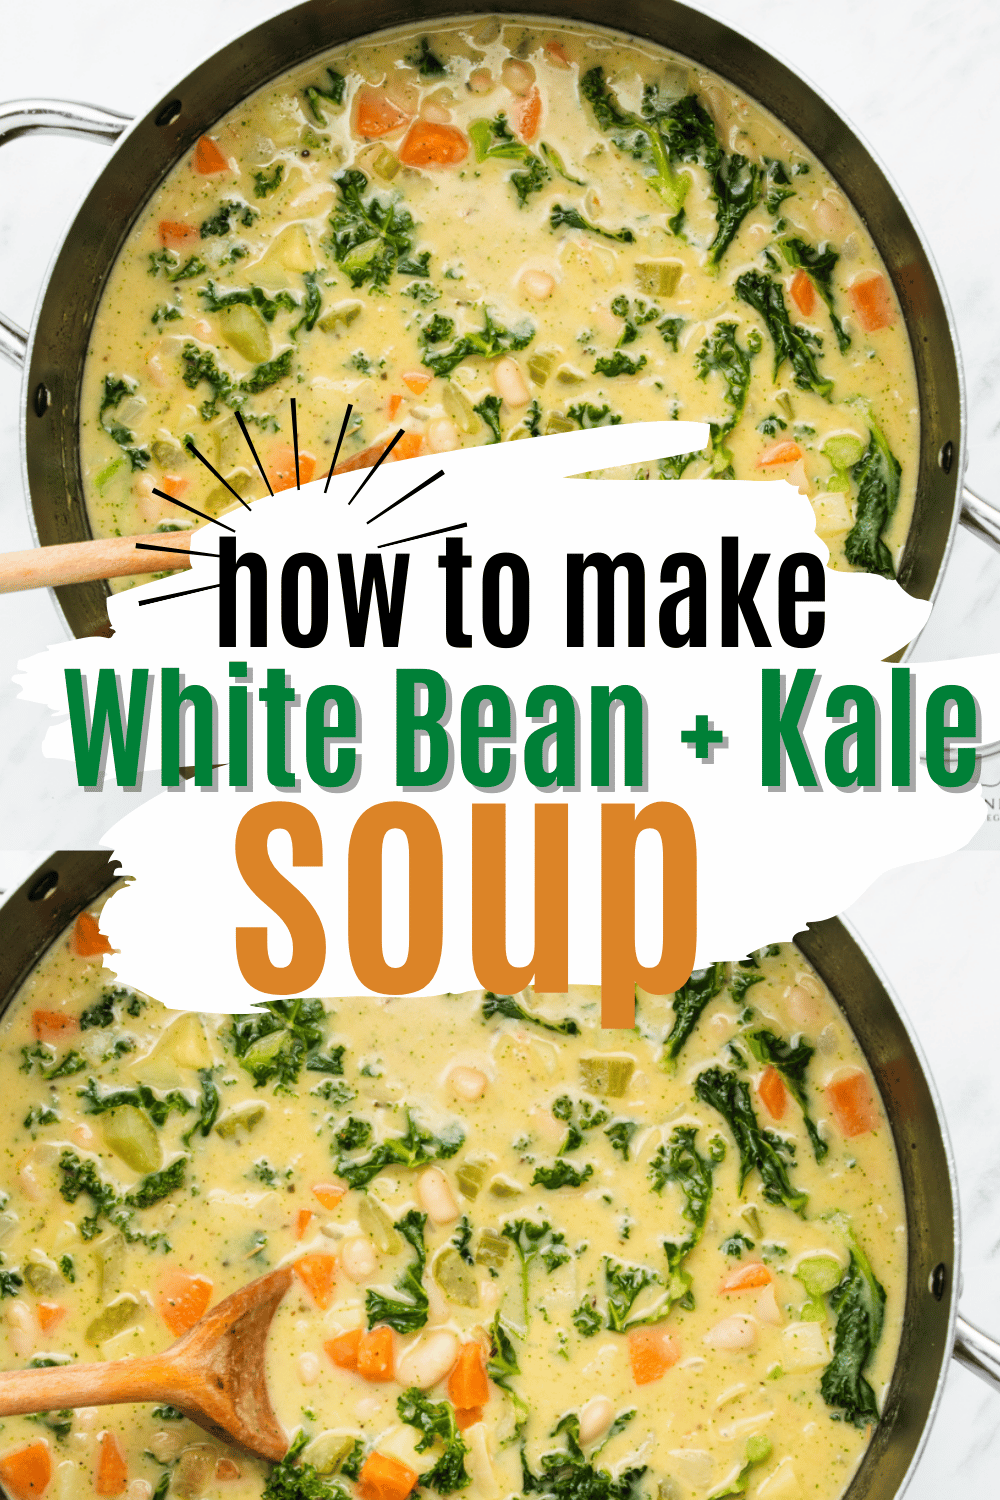 Images of creamy kale soup cooking in a pot. Text overlay says "how to make white bean + kale soup"